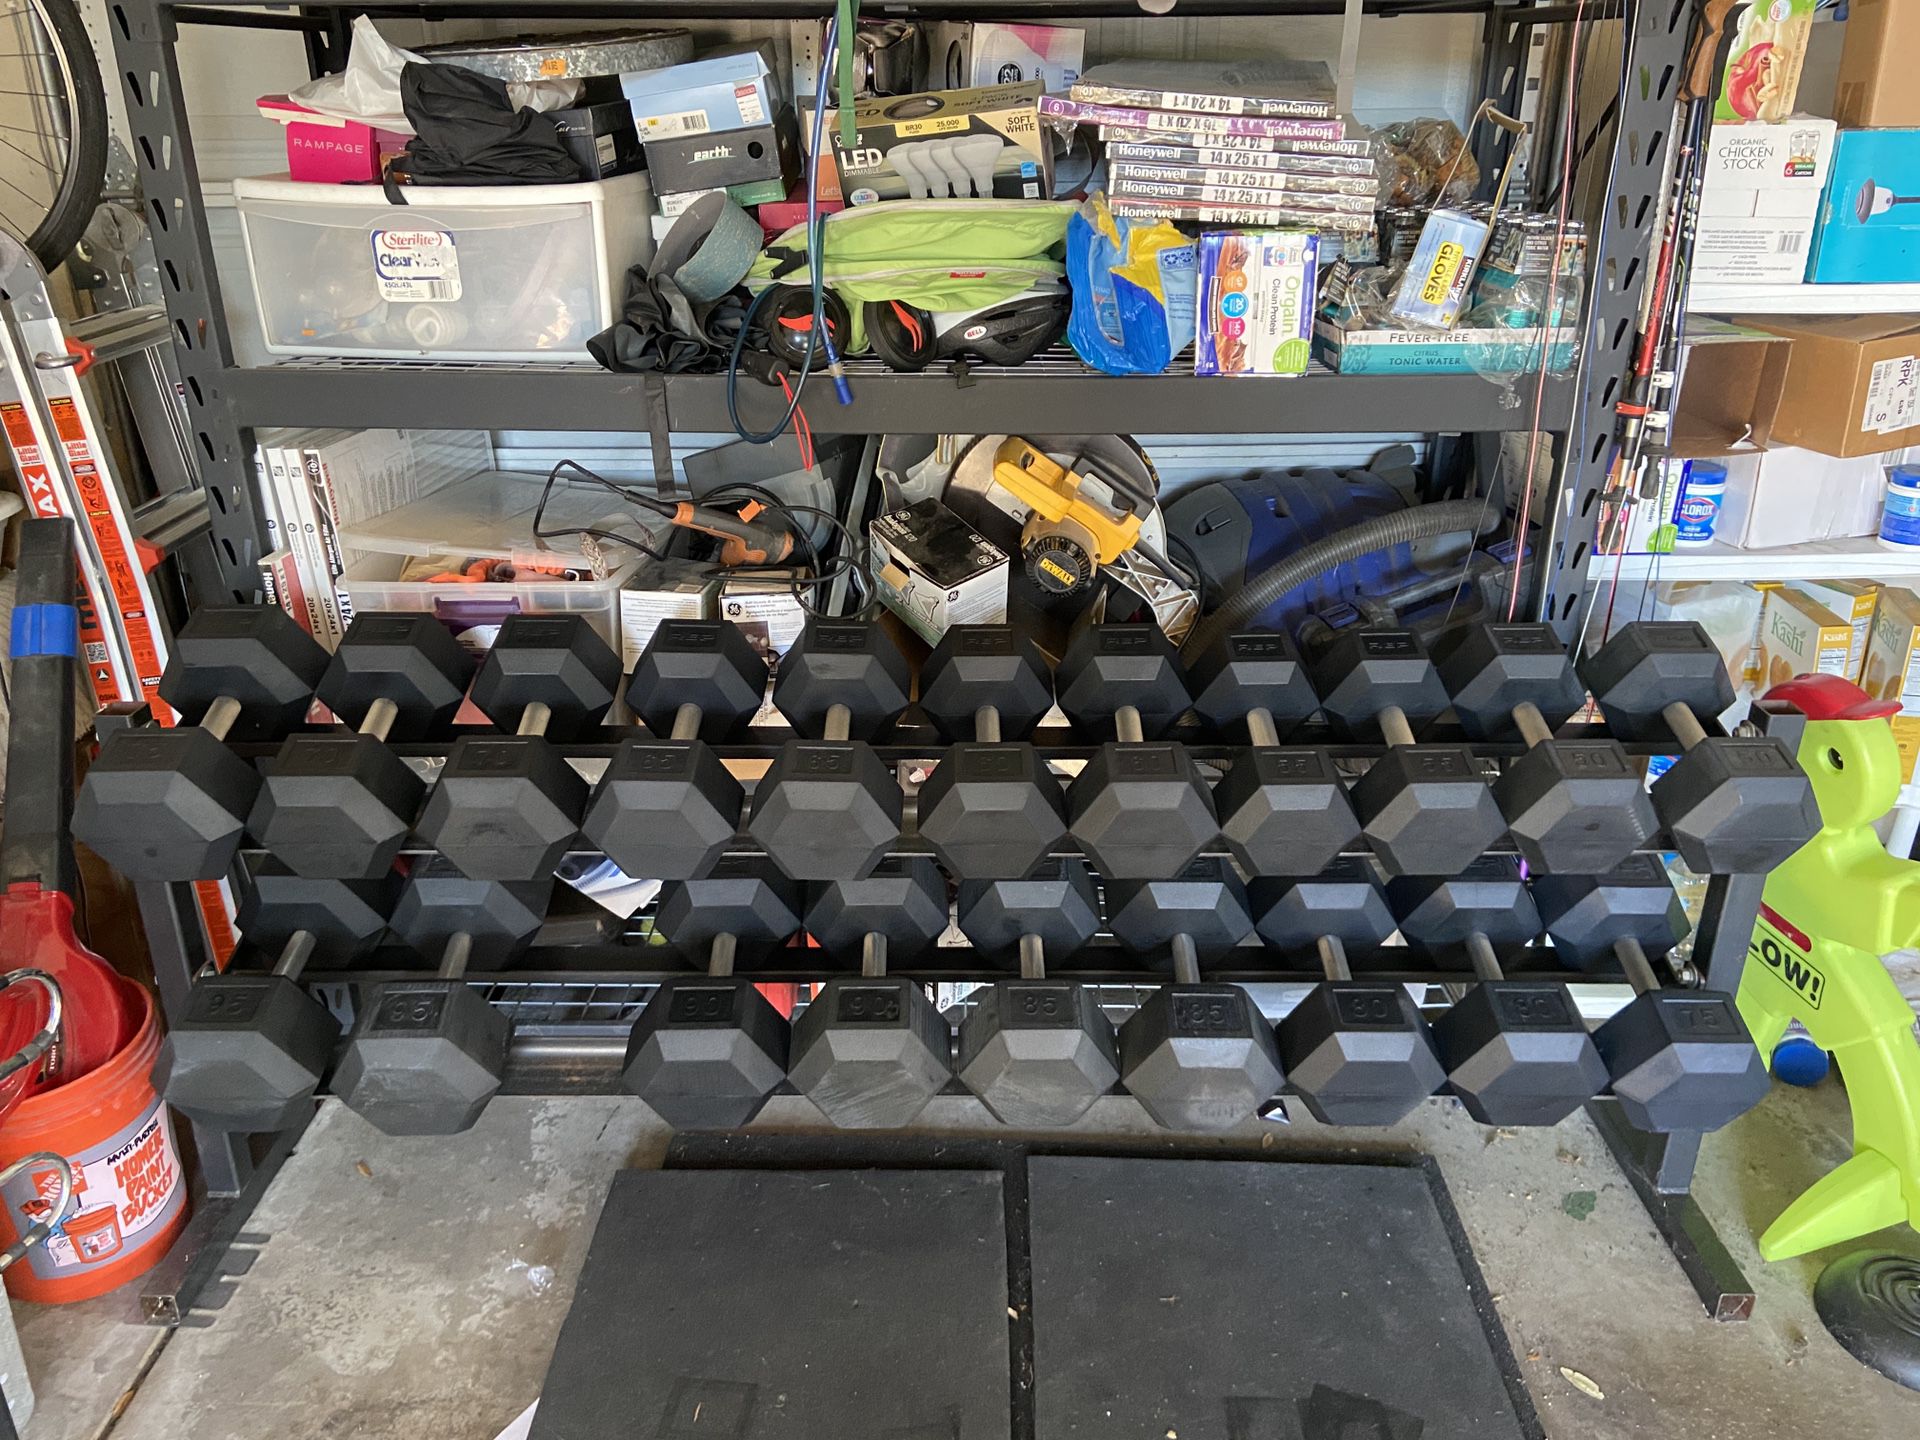 Rep Fitness 5-100lb dumbbell pairs $2/lb